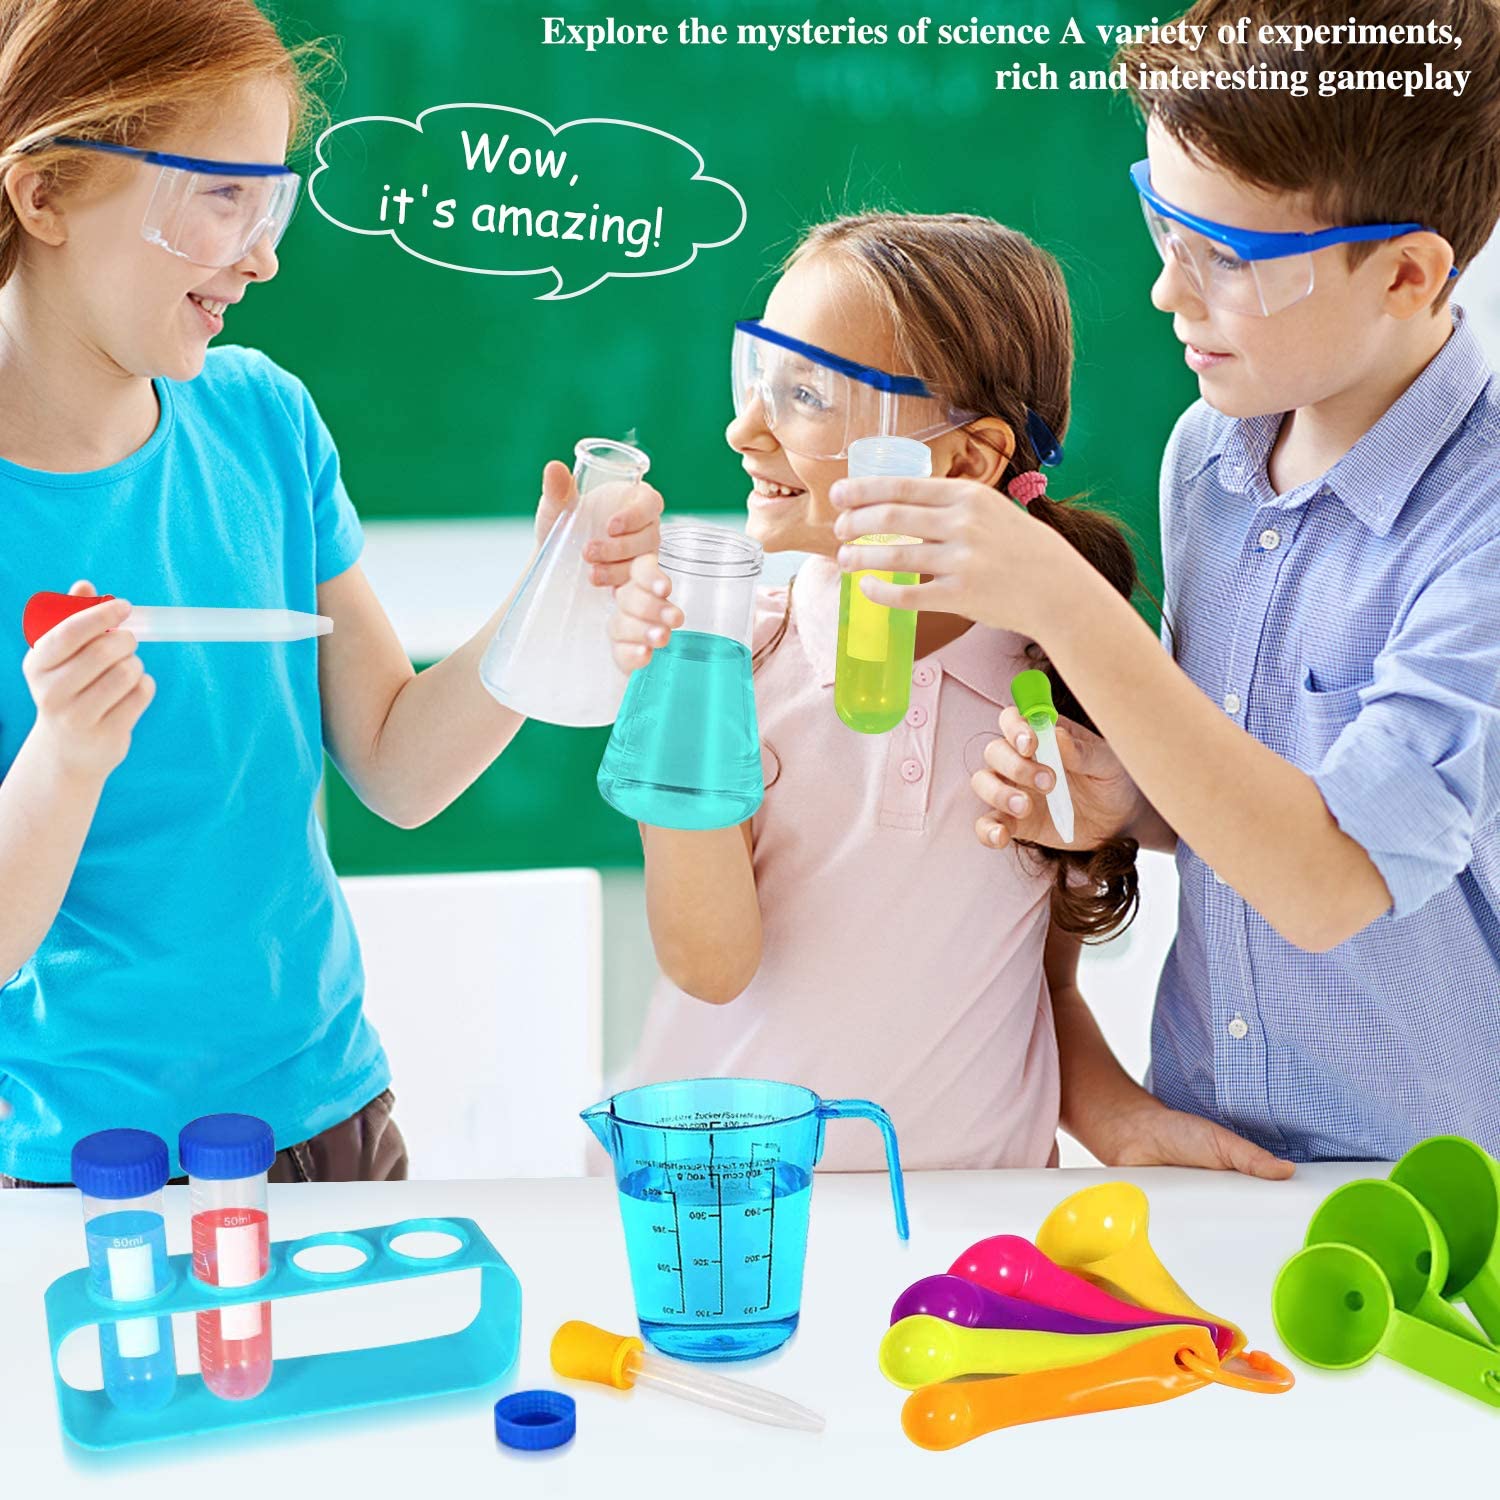 HOMOFY Kids Science Experiment Kit for 5-7 Year Old Stem Education 16pcs for sale online 